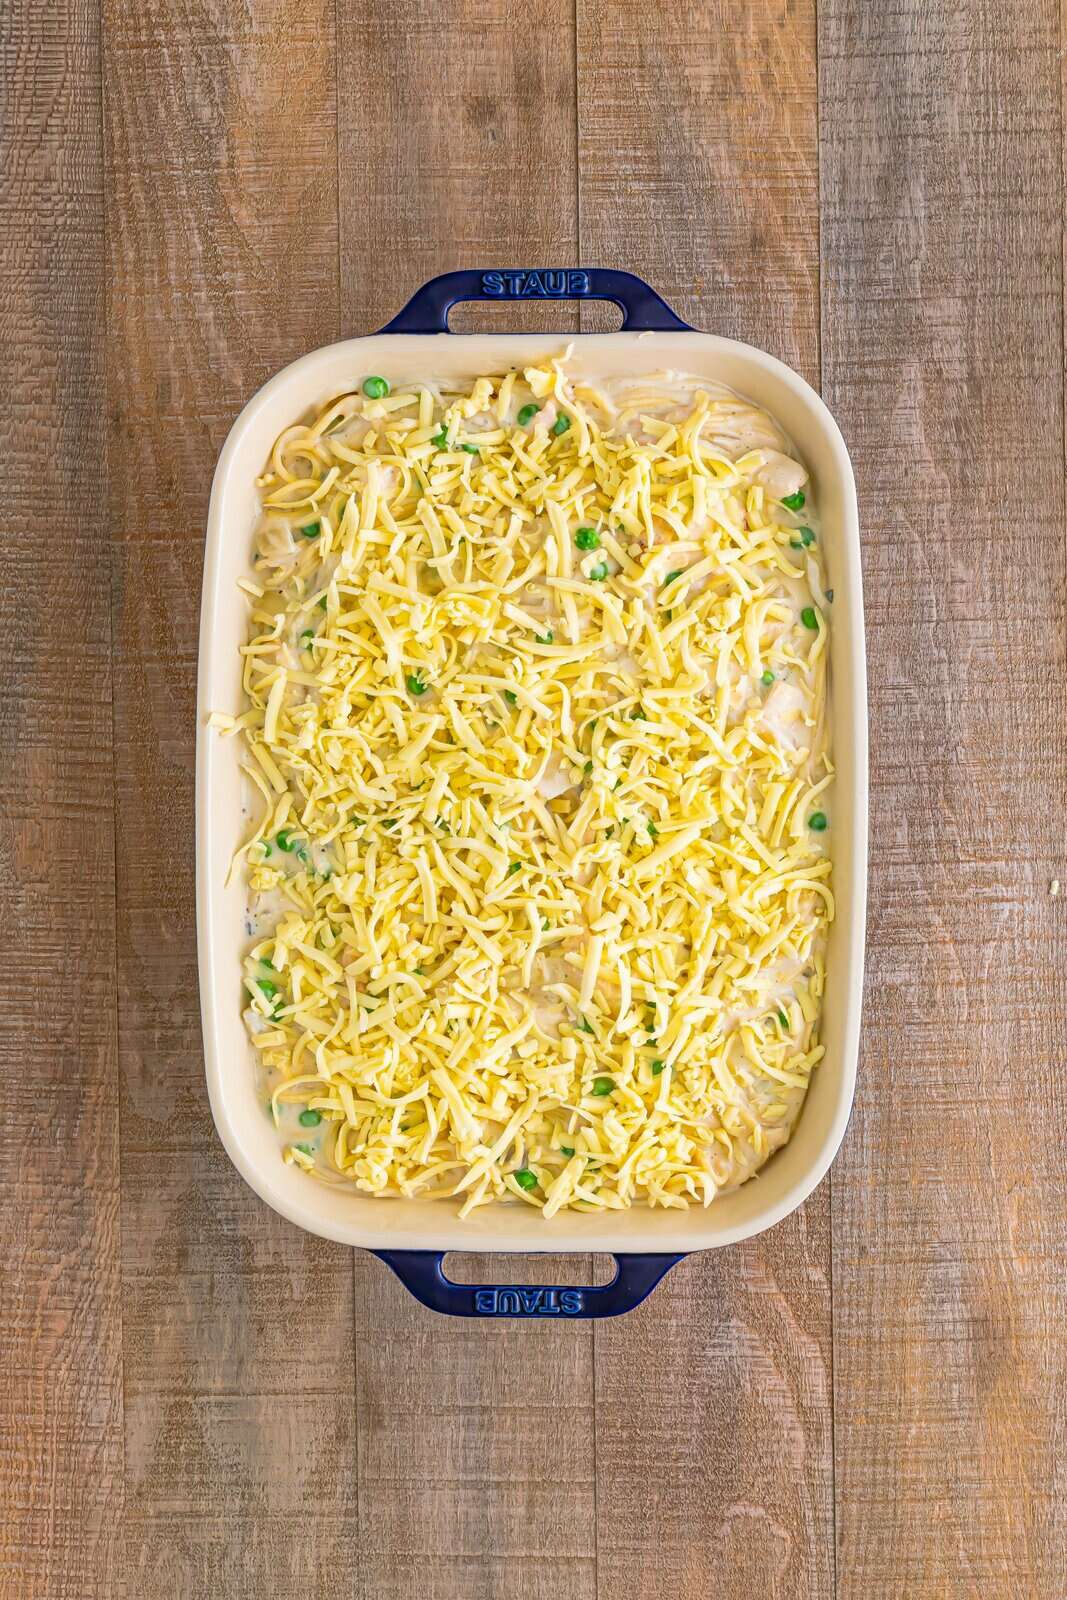 Mixture added to prepared baking dish with cheese sprinkled on top.